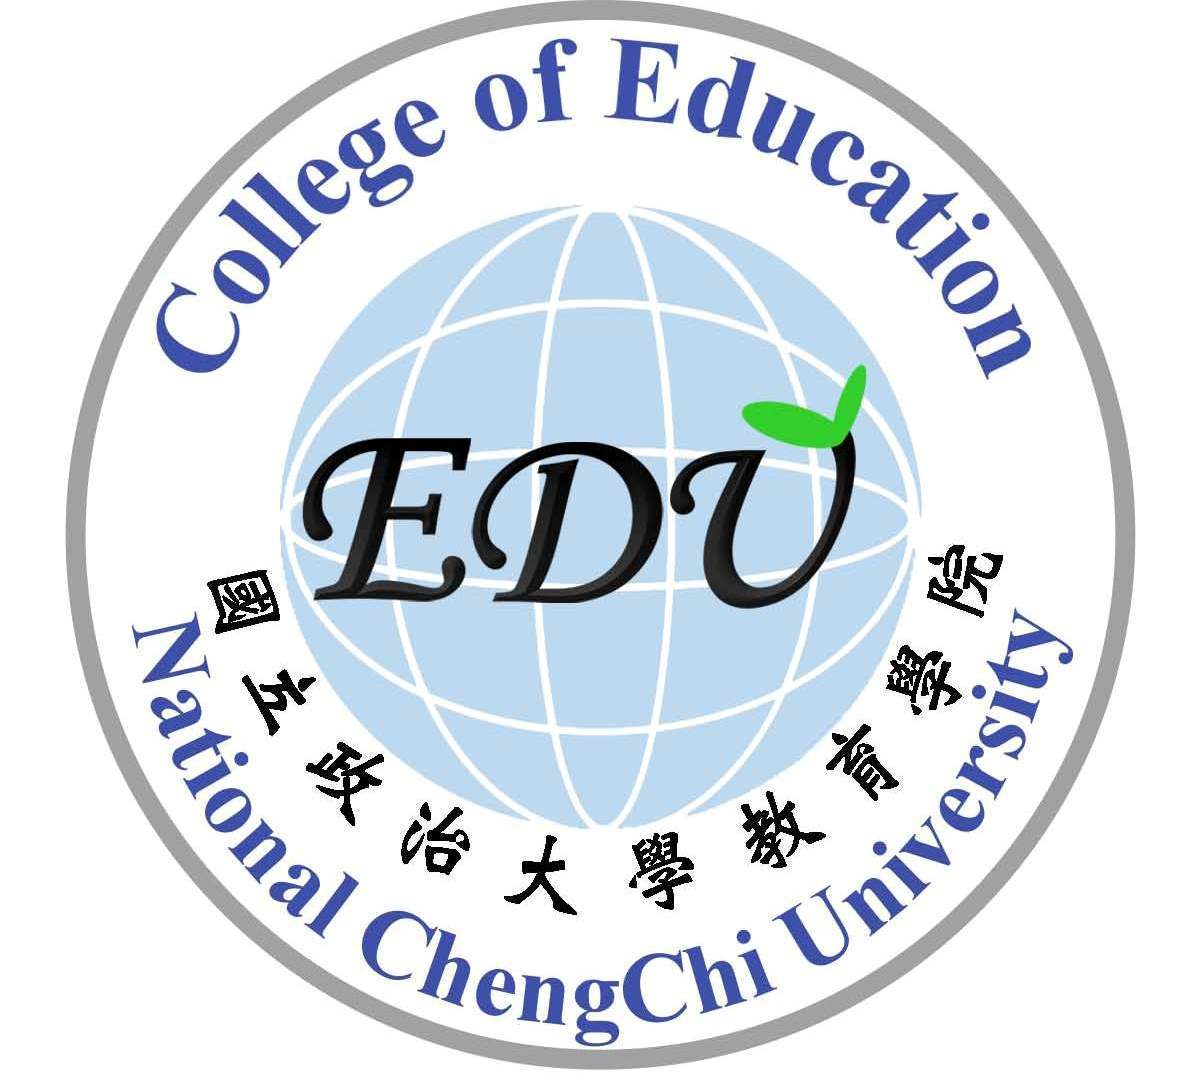 LOGO - College of Education